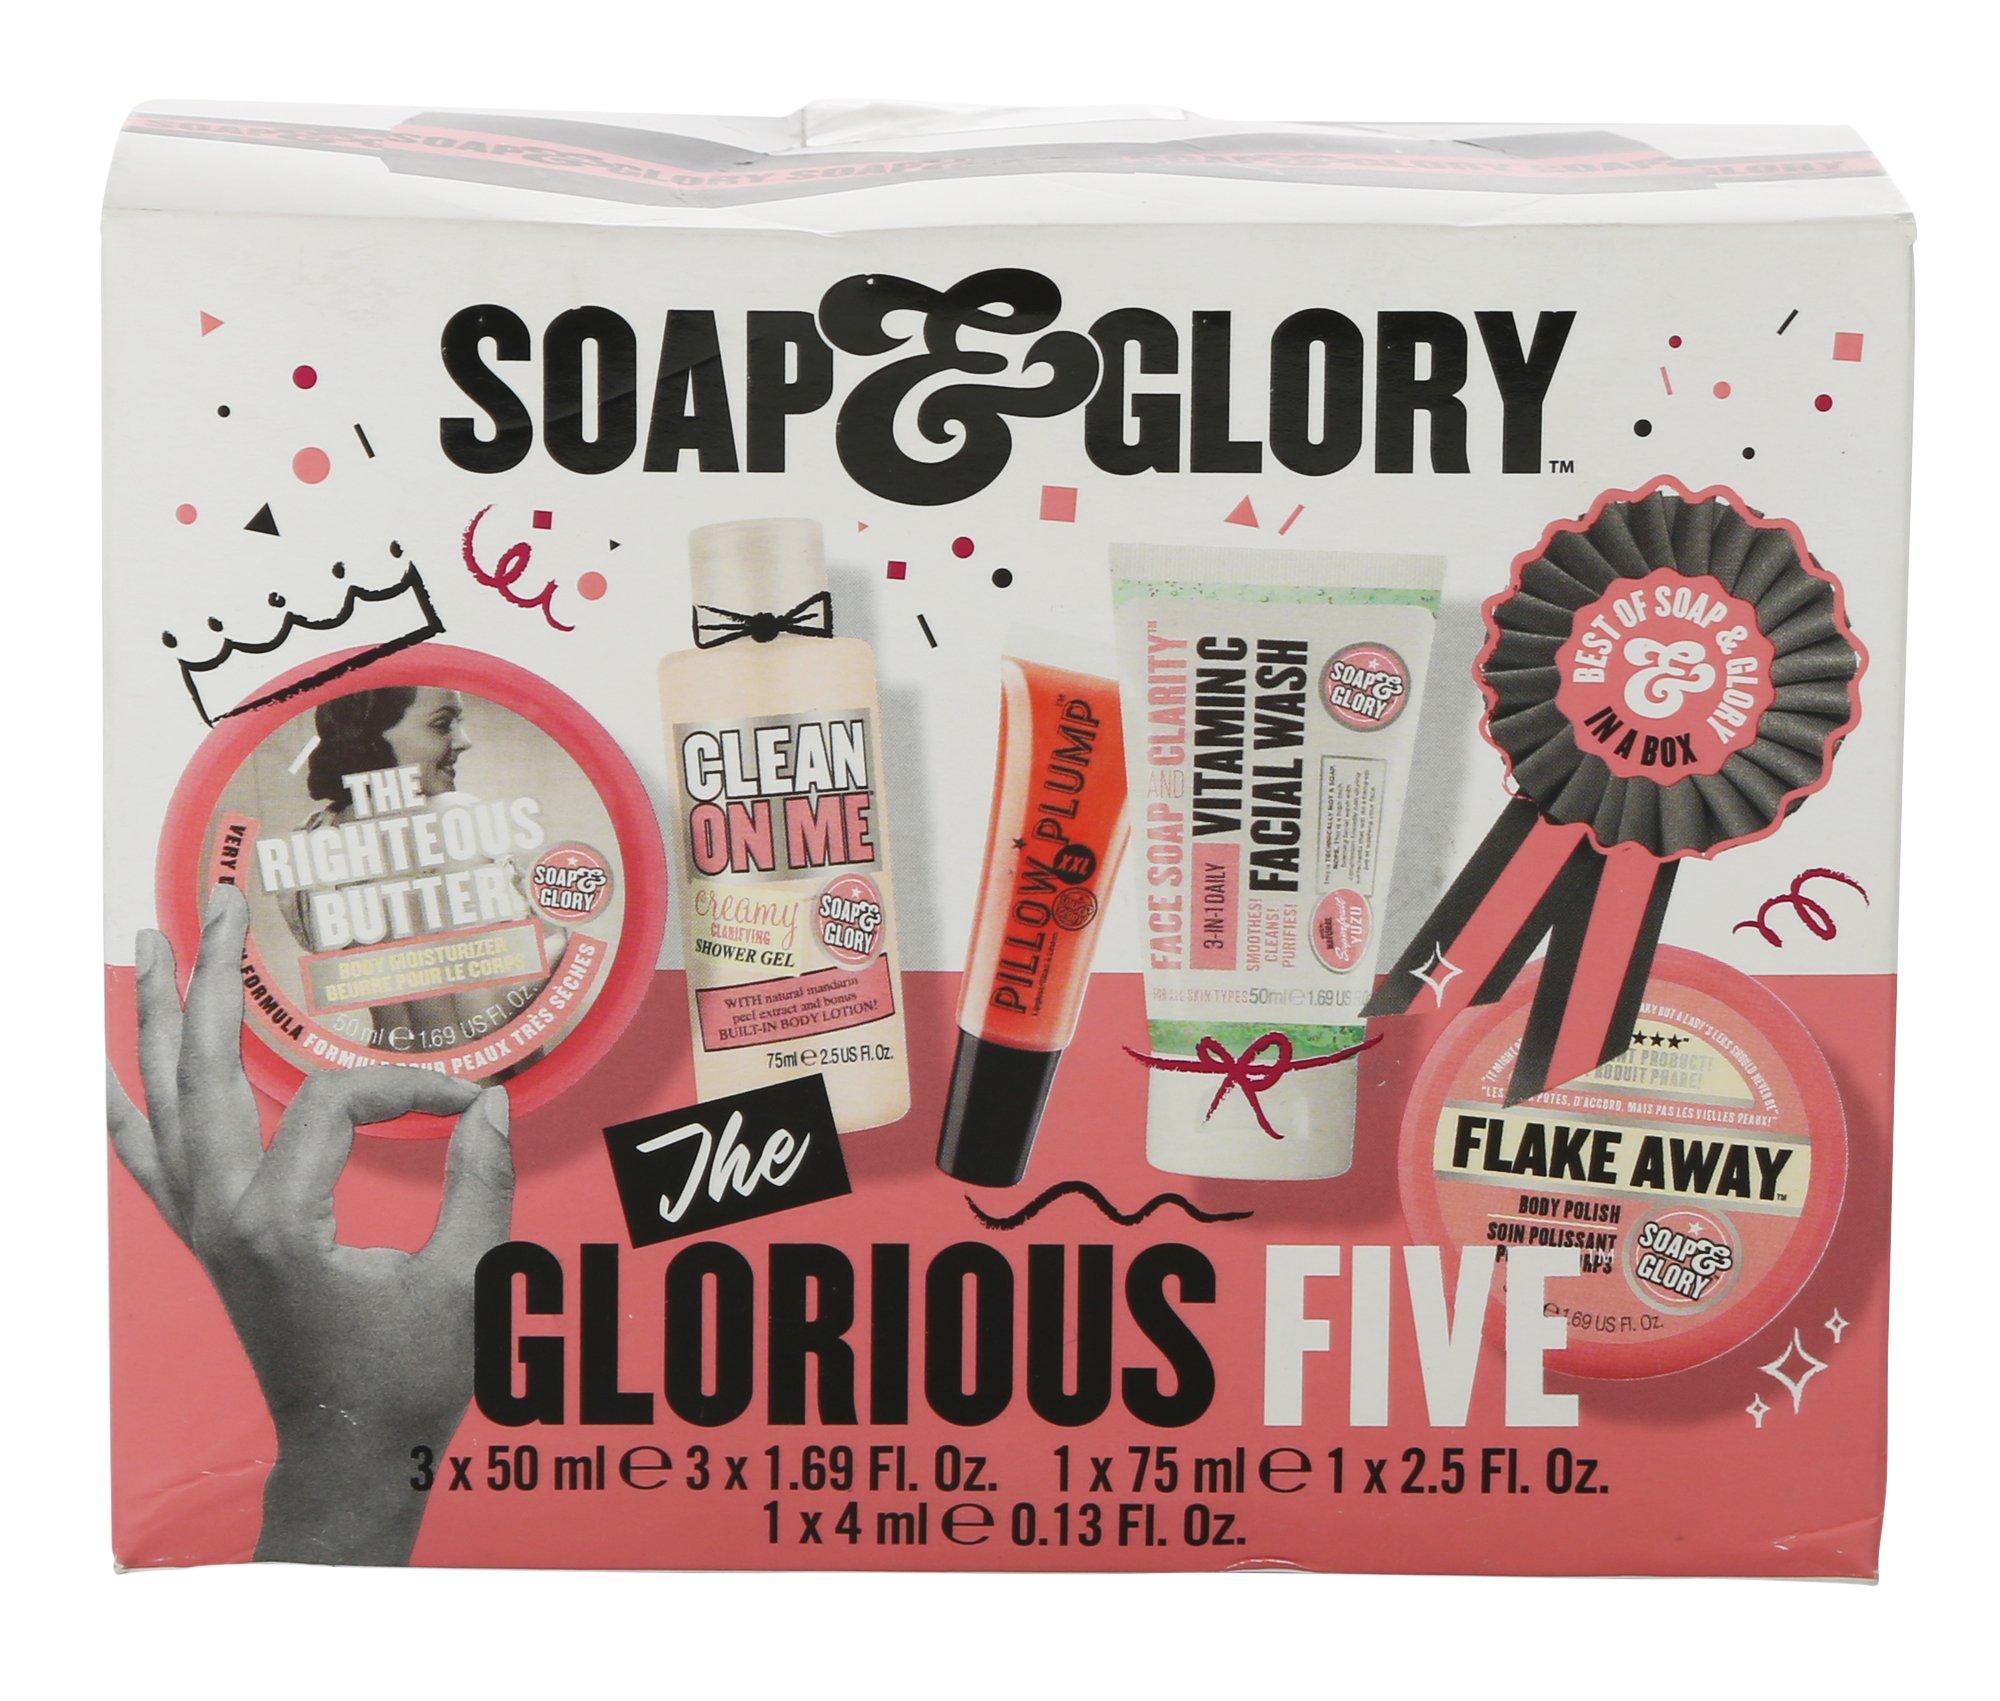 The Glorious Five Body Care Set